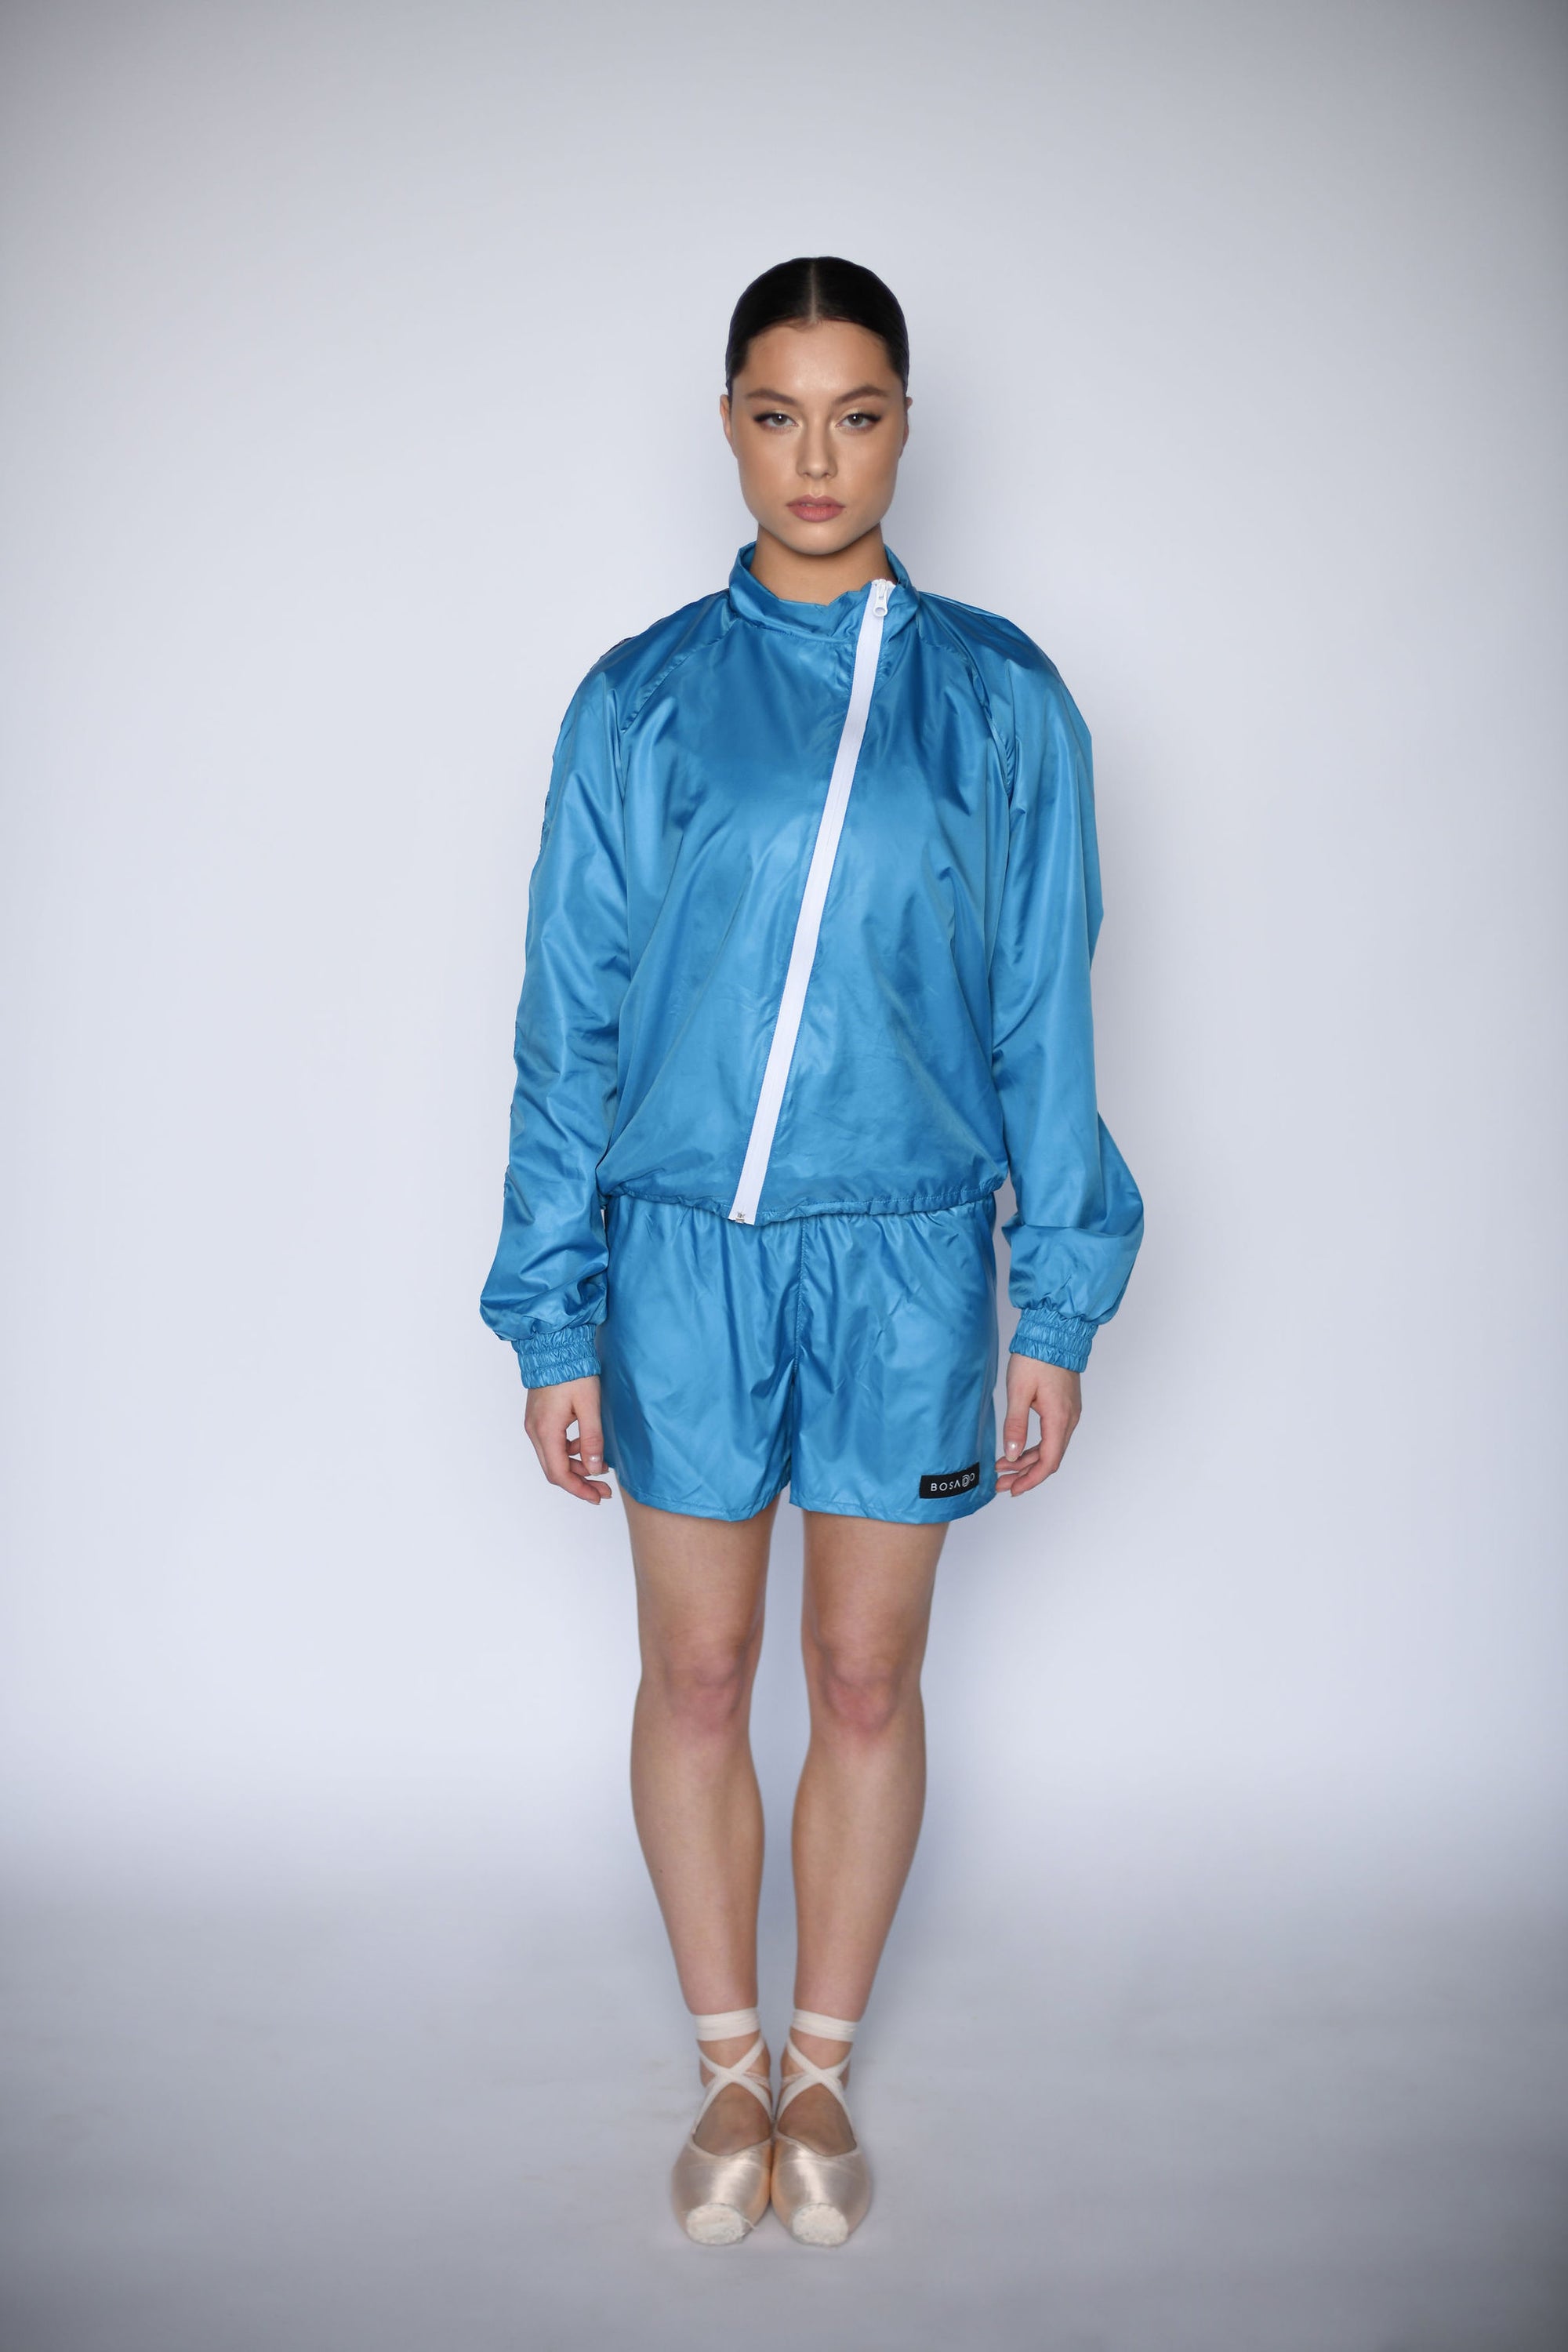 NEW URBAN SWAN COLLECTION S/S 23 | Ice blue sports suit with pants + shorts